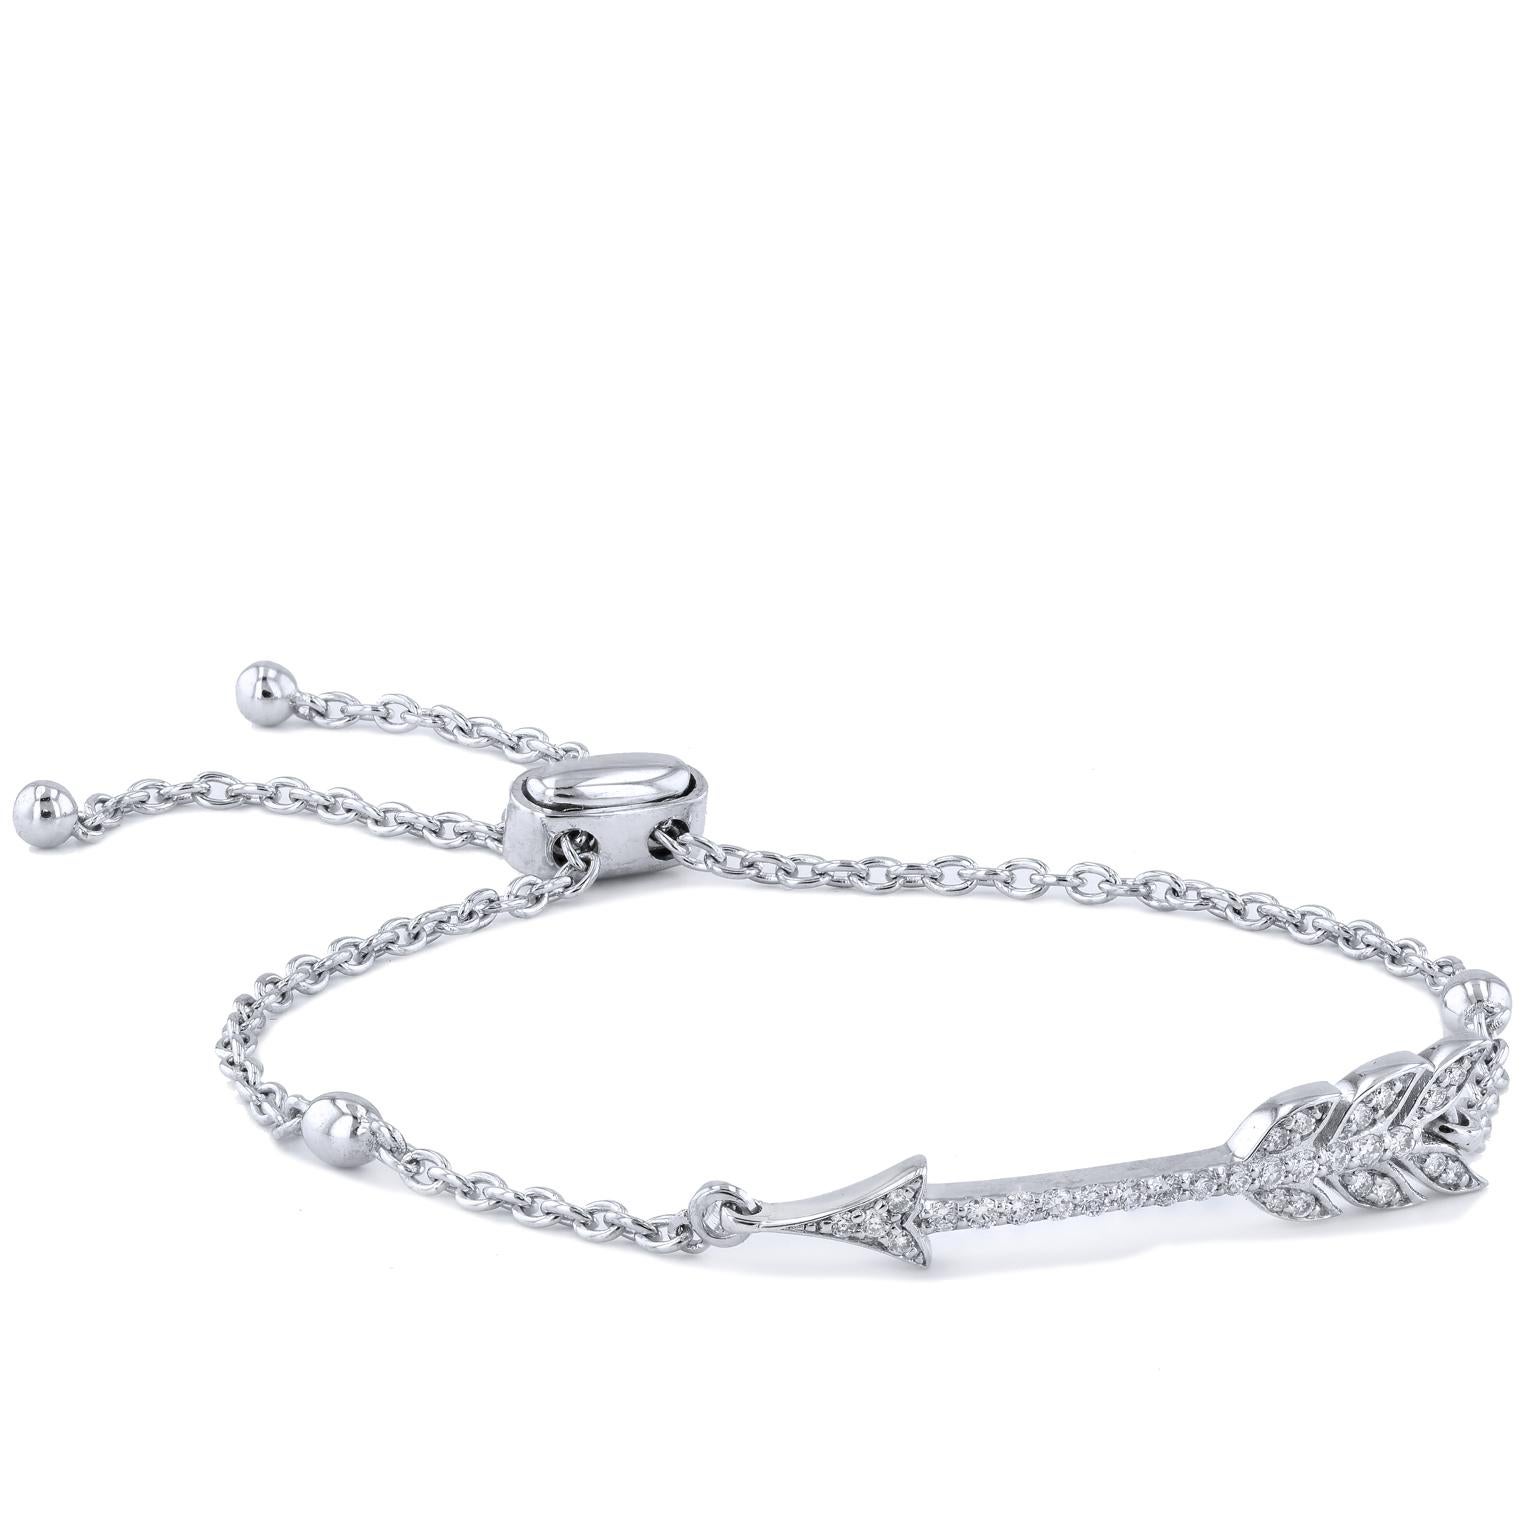 Make every day an adventure with the help of this piece to bring out your wild side. Featuring 0.22 carat pave-set diamonds held together by an elegant yet casual sliding clasp, this 14 karat white gold bracelet will keep your style on point.